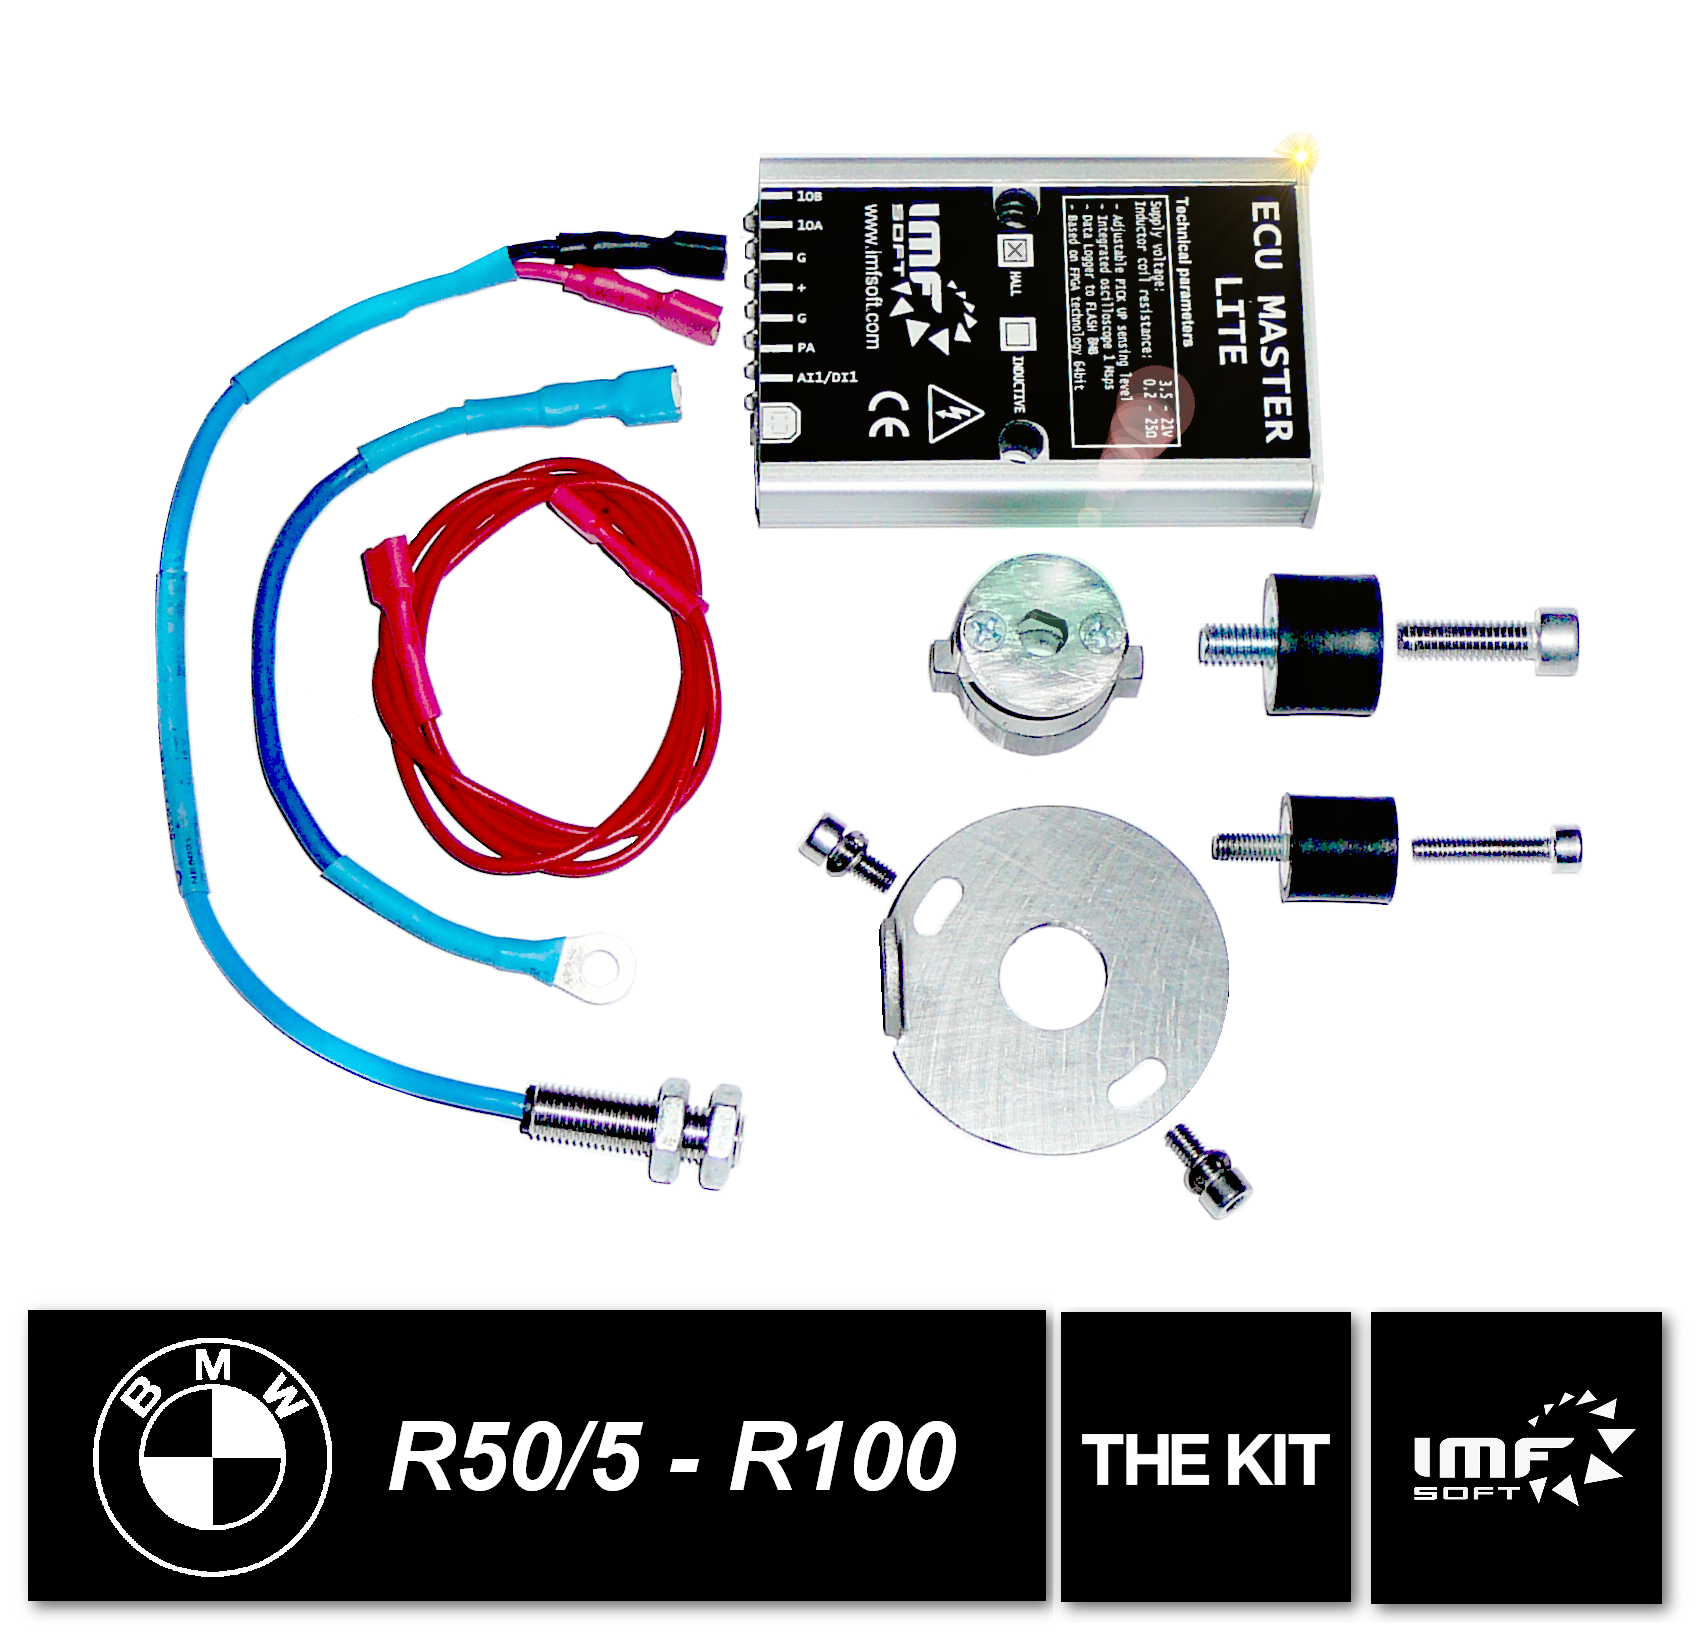 Bmw R75/5 Ignitiin Coil Wiring from imfsoft.com